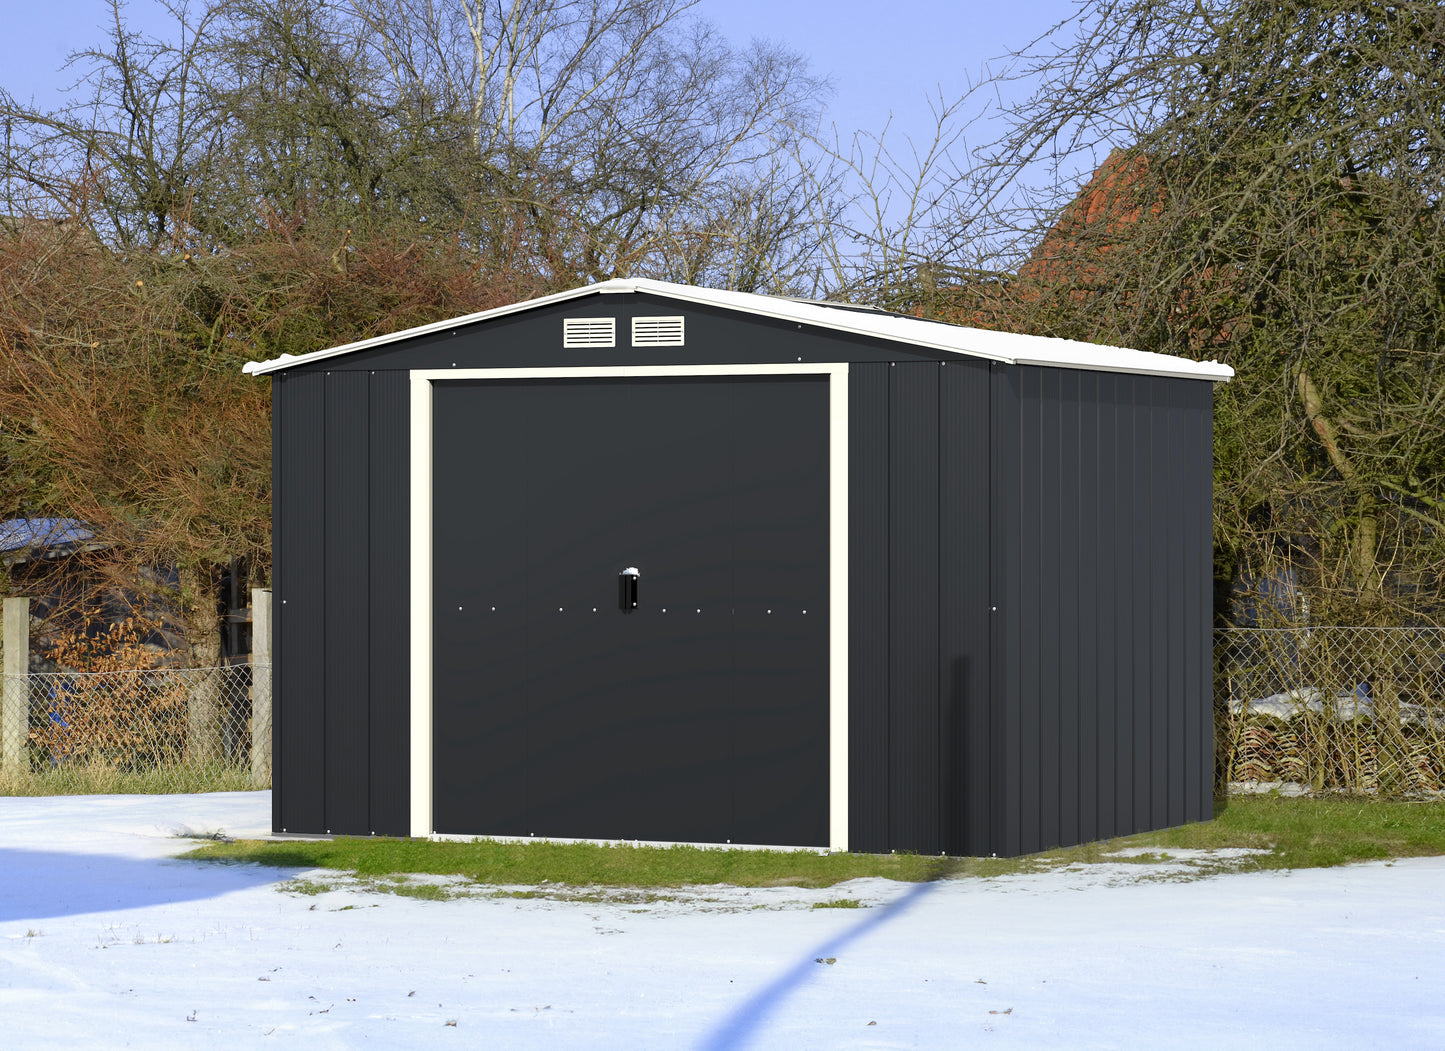 Duramax ECO 3.12 x 2.34 m Metal Shed - Anthracite